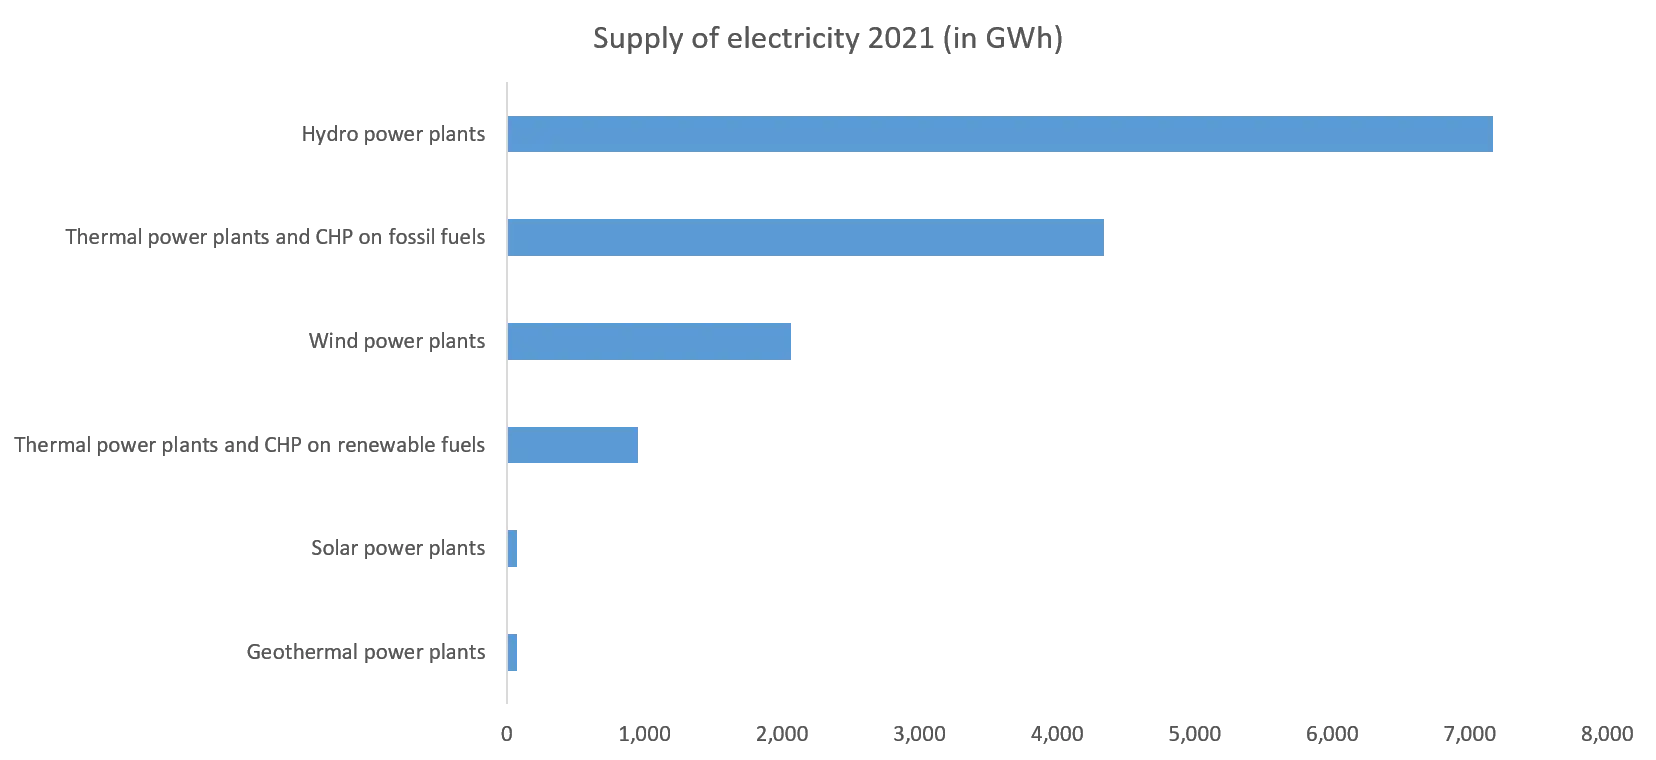 Supply_of_electricity_2021_in_GWh.png